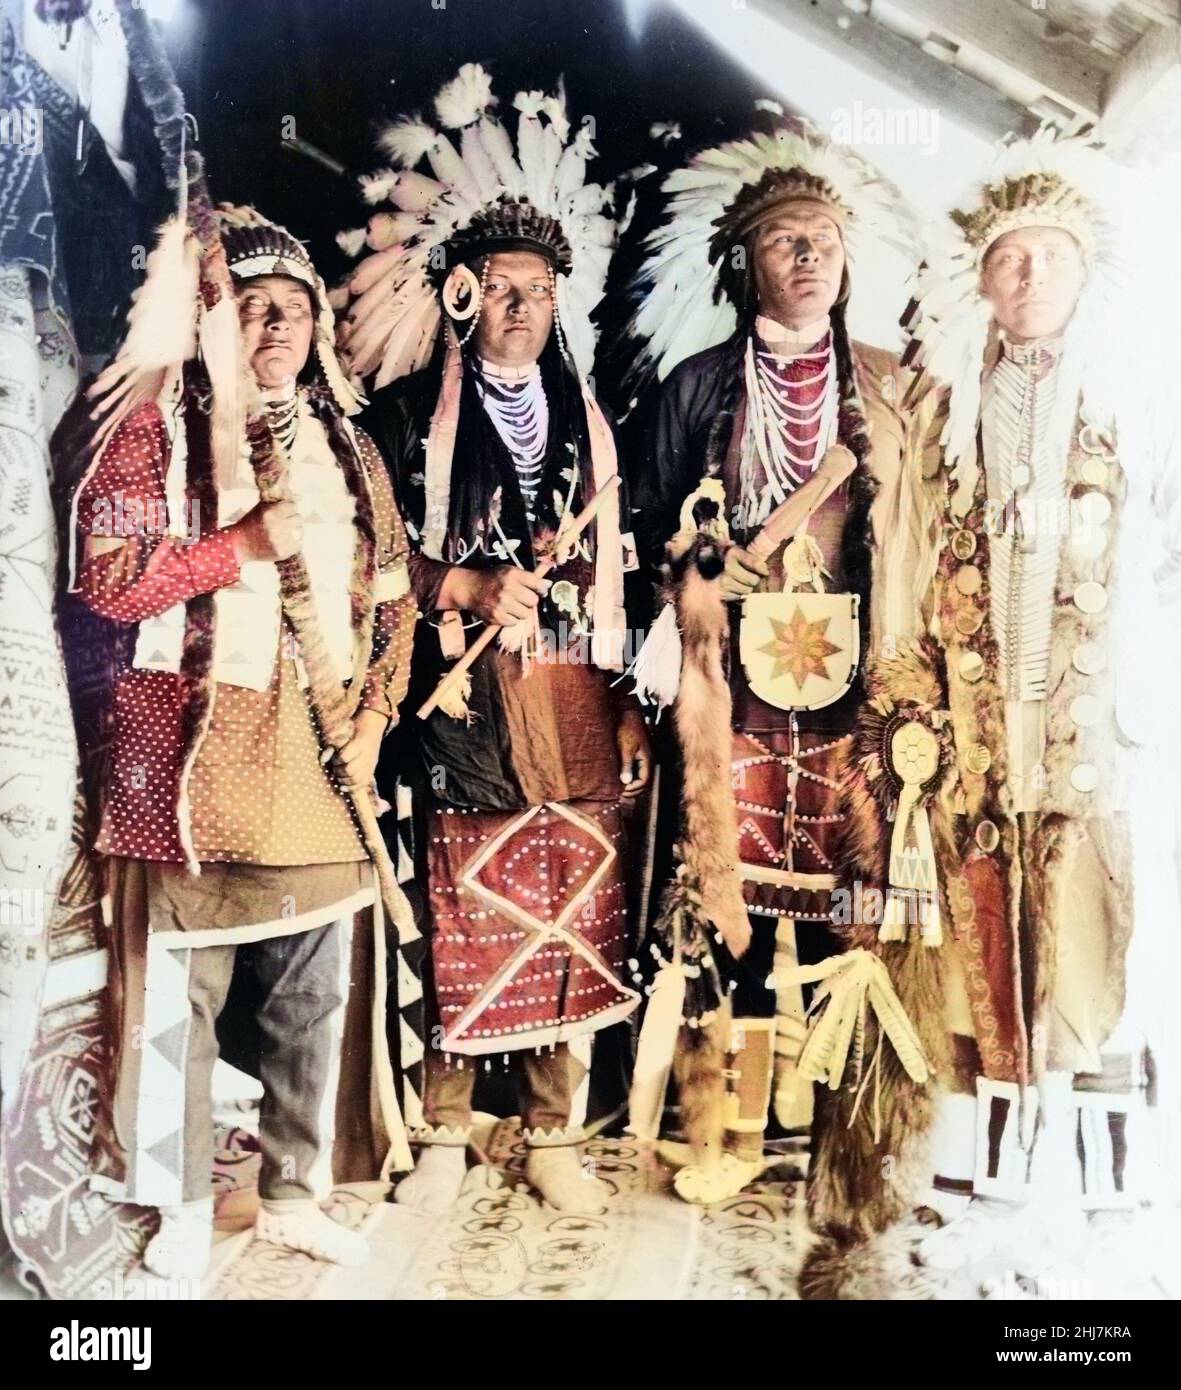 Four Nez Percé Indians, dressed for dance, on Colville Indian Reservation (native americans) c 1910. Photo by Clair Hunt. Colorized. Stock Photo